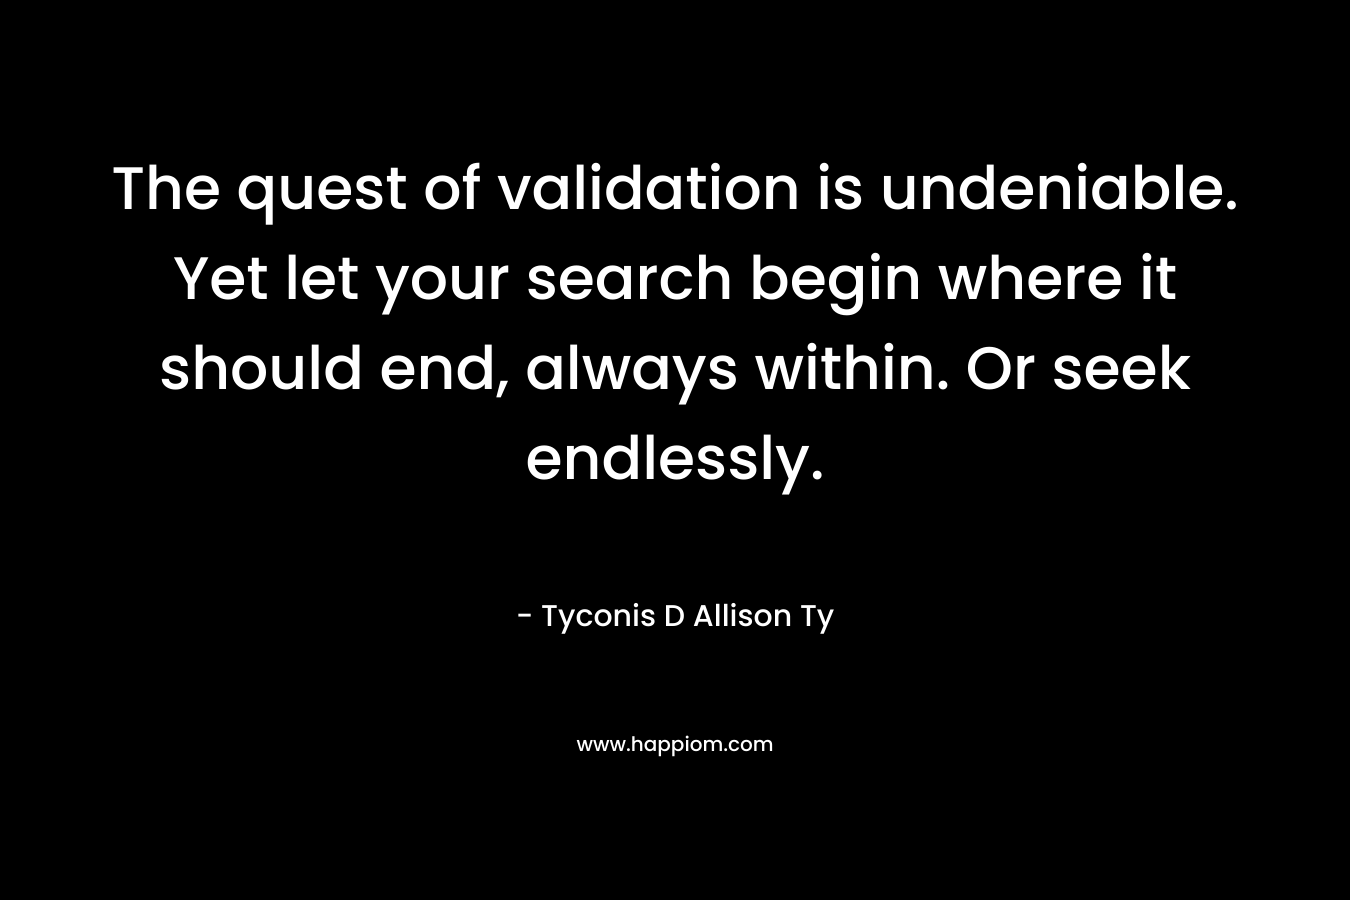 The quest of validation is undeniable. Yet let your search begin where it should end, always within. Or seek endlessly.